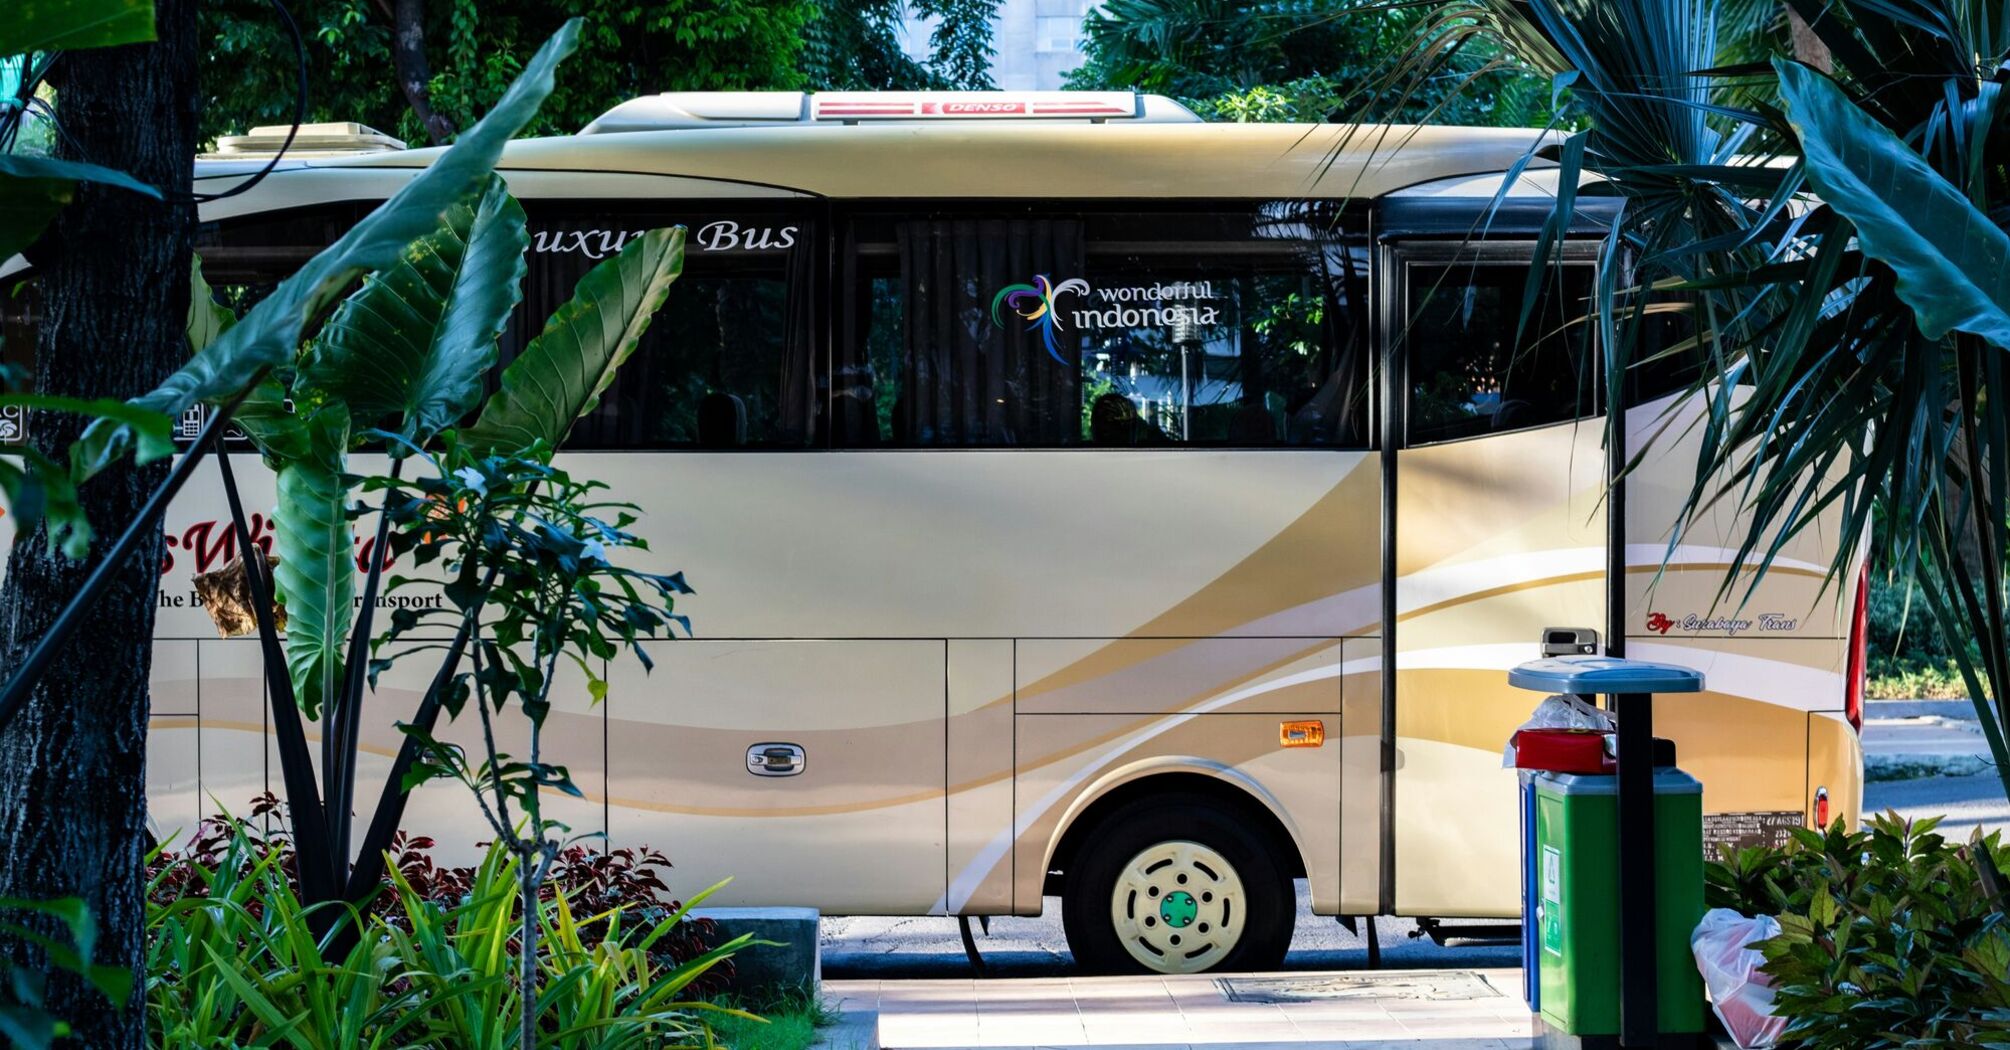 A luxury coach bus, parked amidst lush greenery